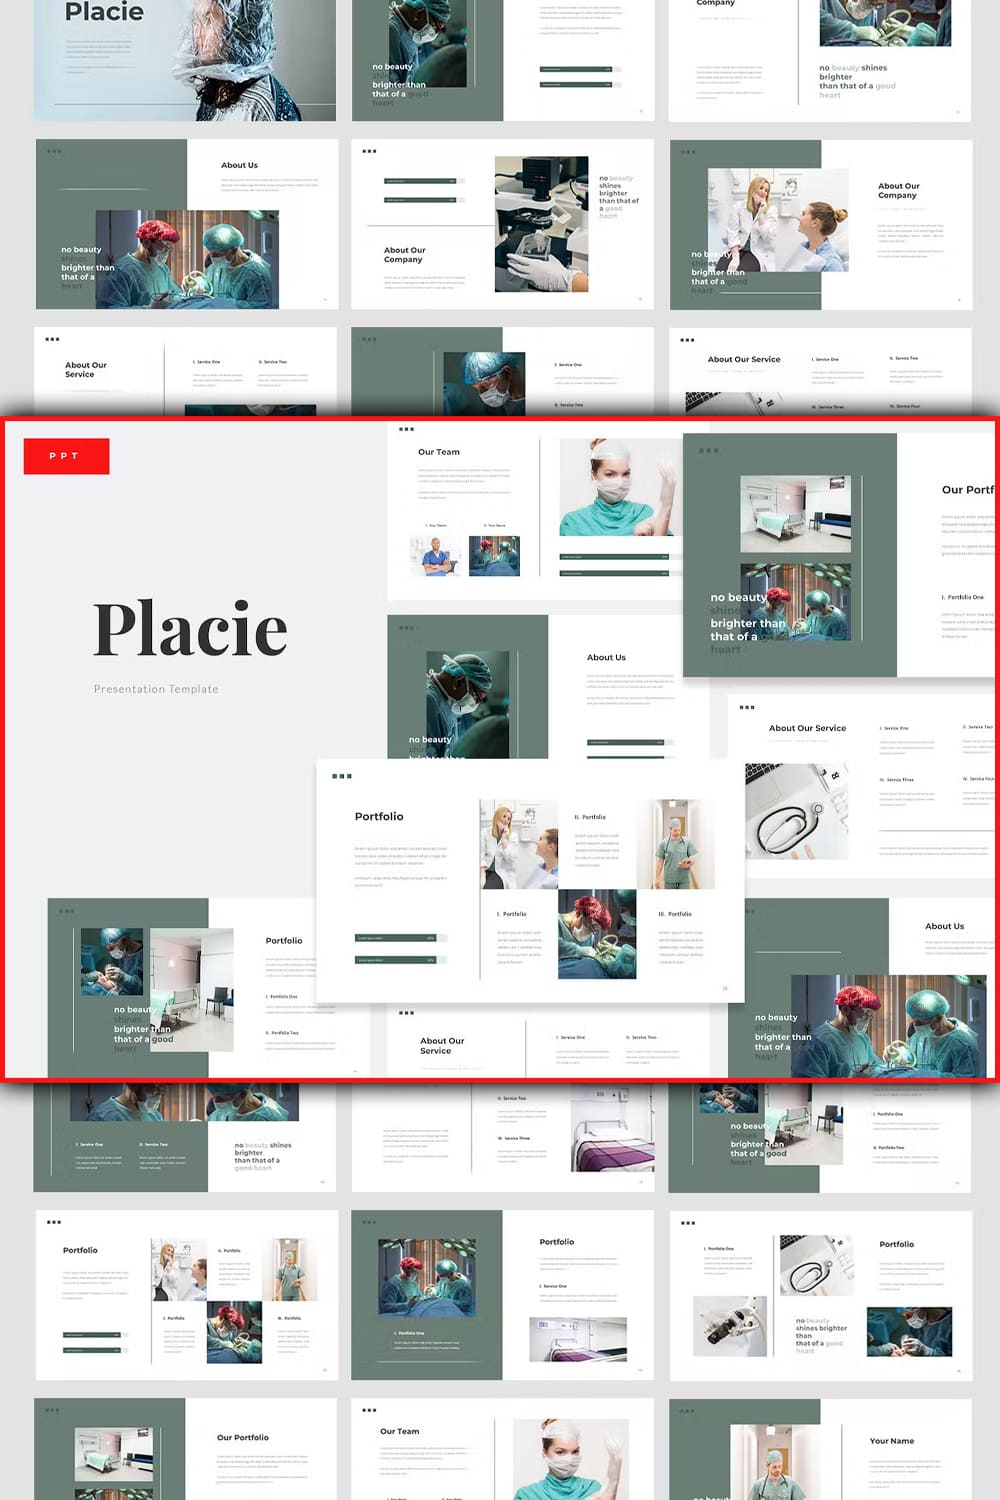 Placie medical surgery powerpoint template - pinterest image preview.